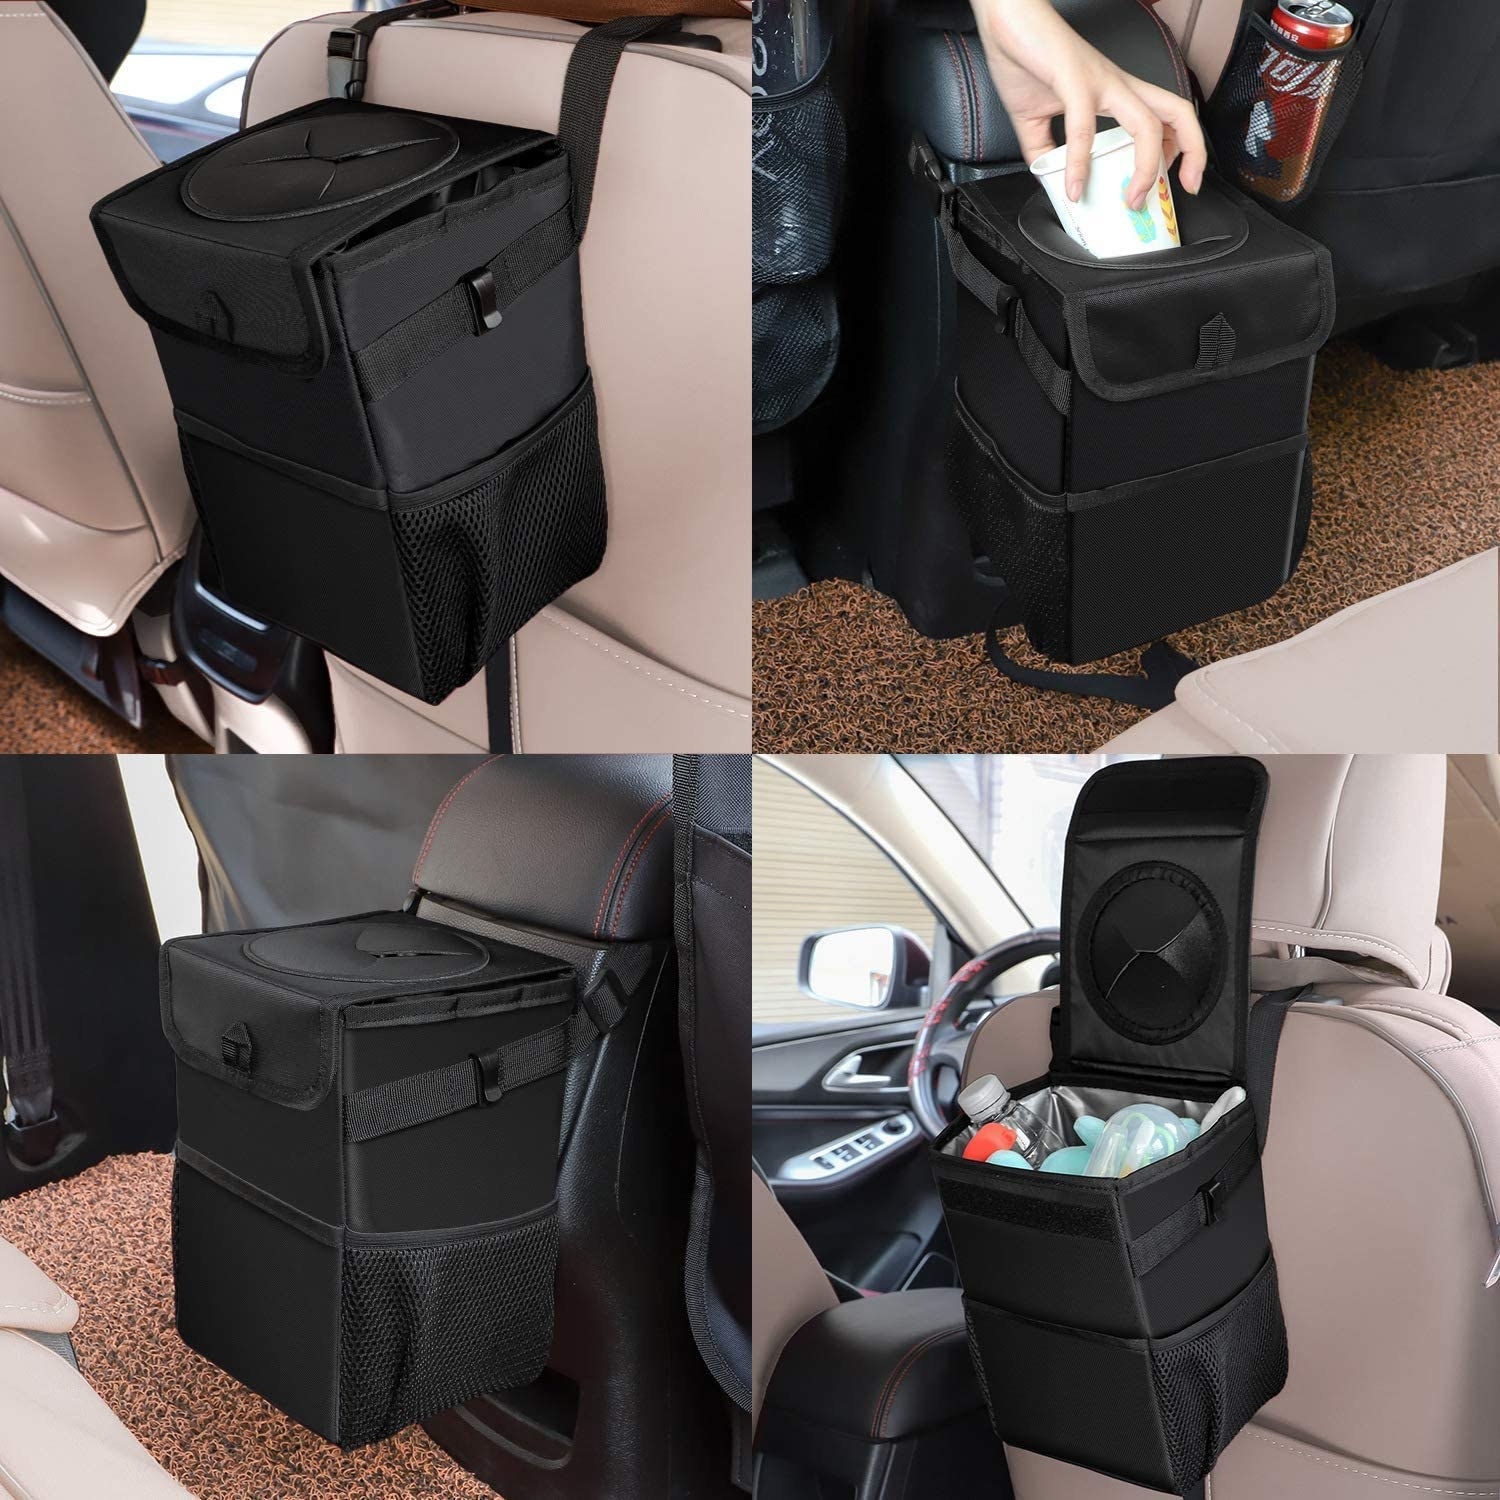 the car trashcan diagram showing that you can place it on the back of your seat or in the middle of your console